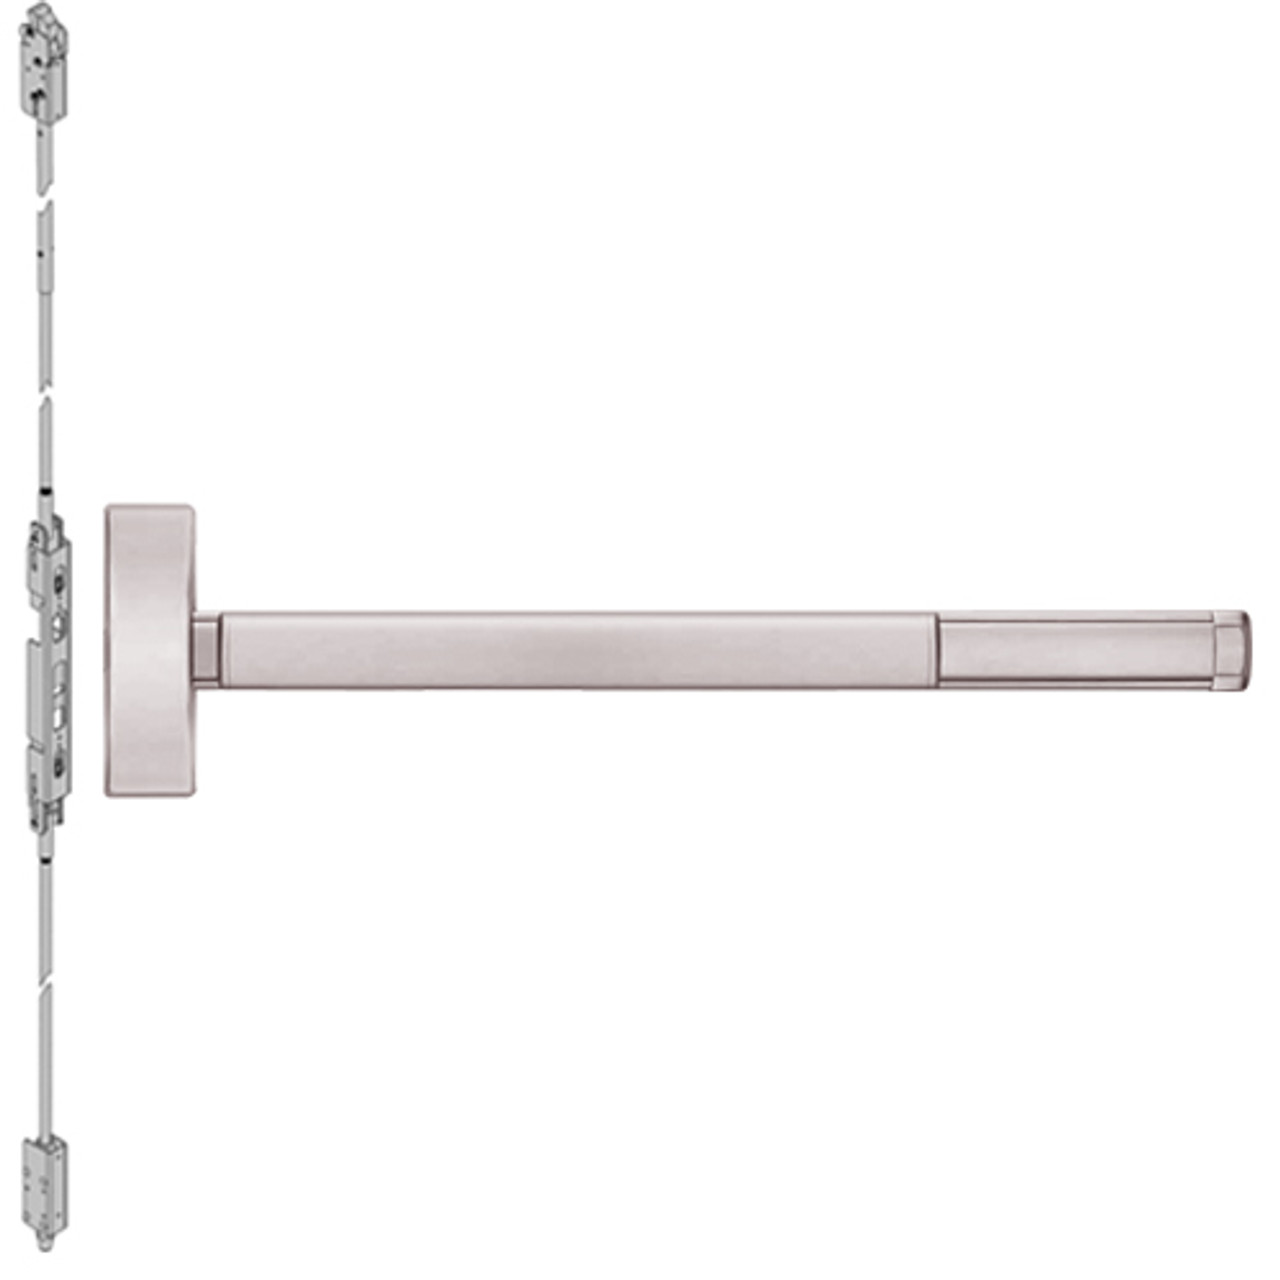 ELR2808-628-36 PHI 2800 Series Concealed Vertical Rod Exit Device with Electric Latch Retraction Prepped for Key Controls Lever-Knob in Satin Aluminum Finish